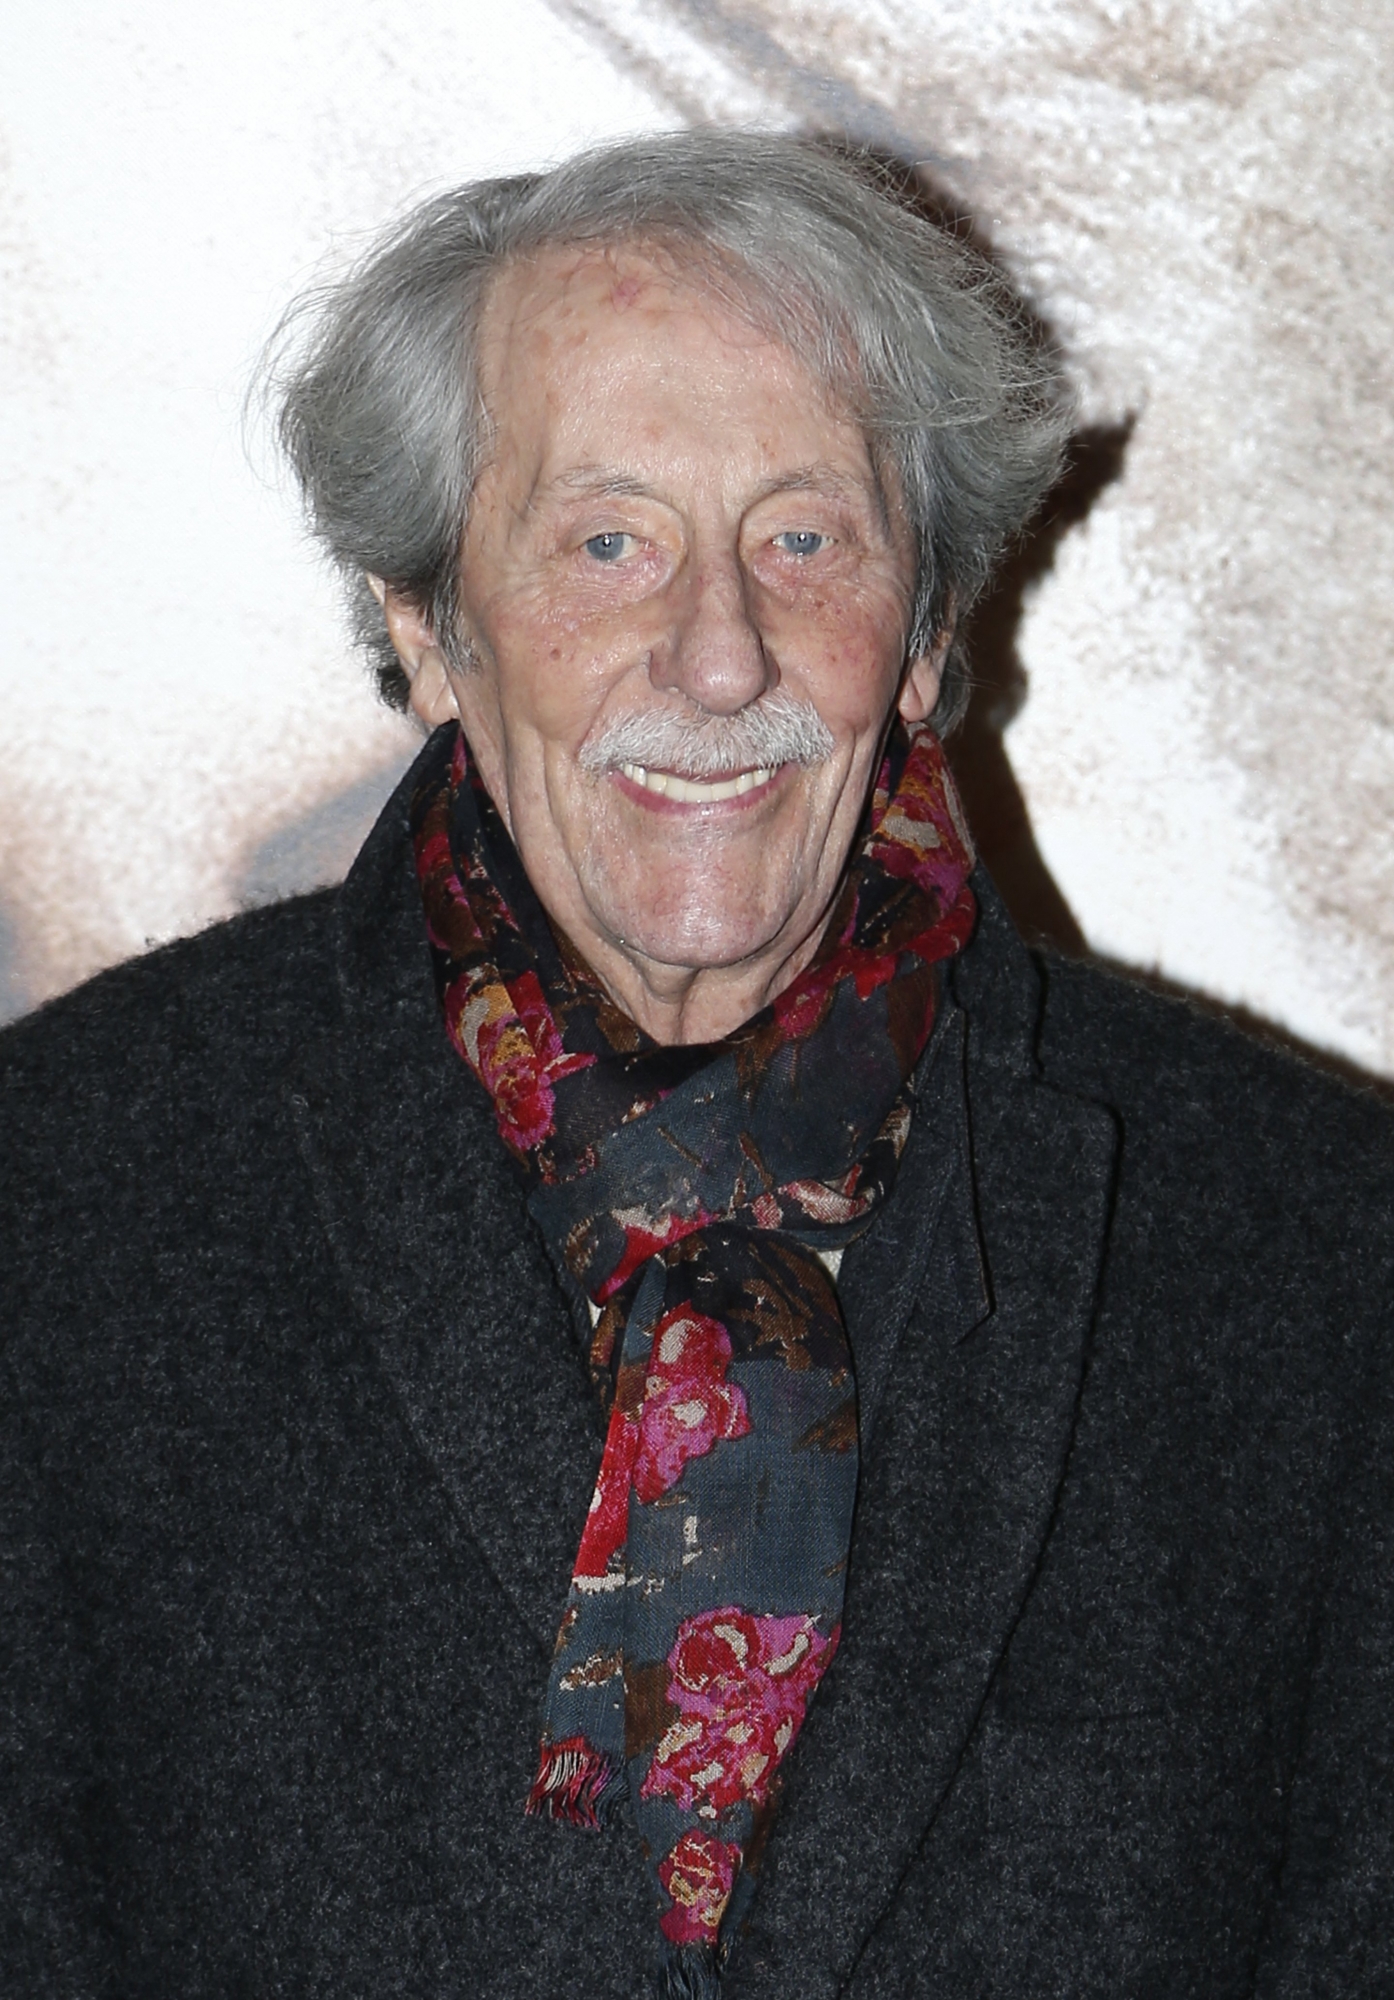 epa06254228 (FILE) A file picture dated 12 February 2013 shows French actor Jean Rochefort at the movie premiere for Disney's film 'Chimpanzee', in Paris, France. Jean Rochefort has died at the age of 87 in Paris, his family announced on 09 October 2017.  EPA/IAN LANGSDON